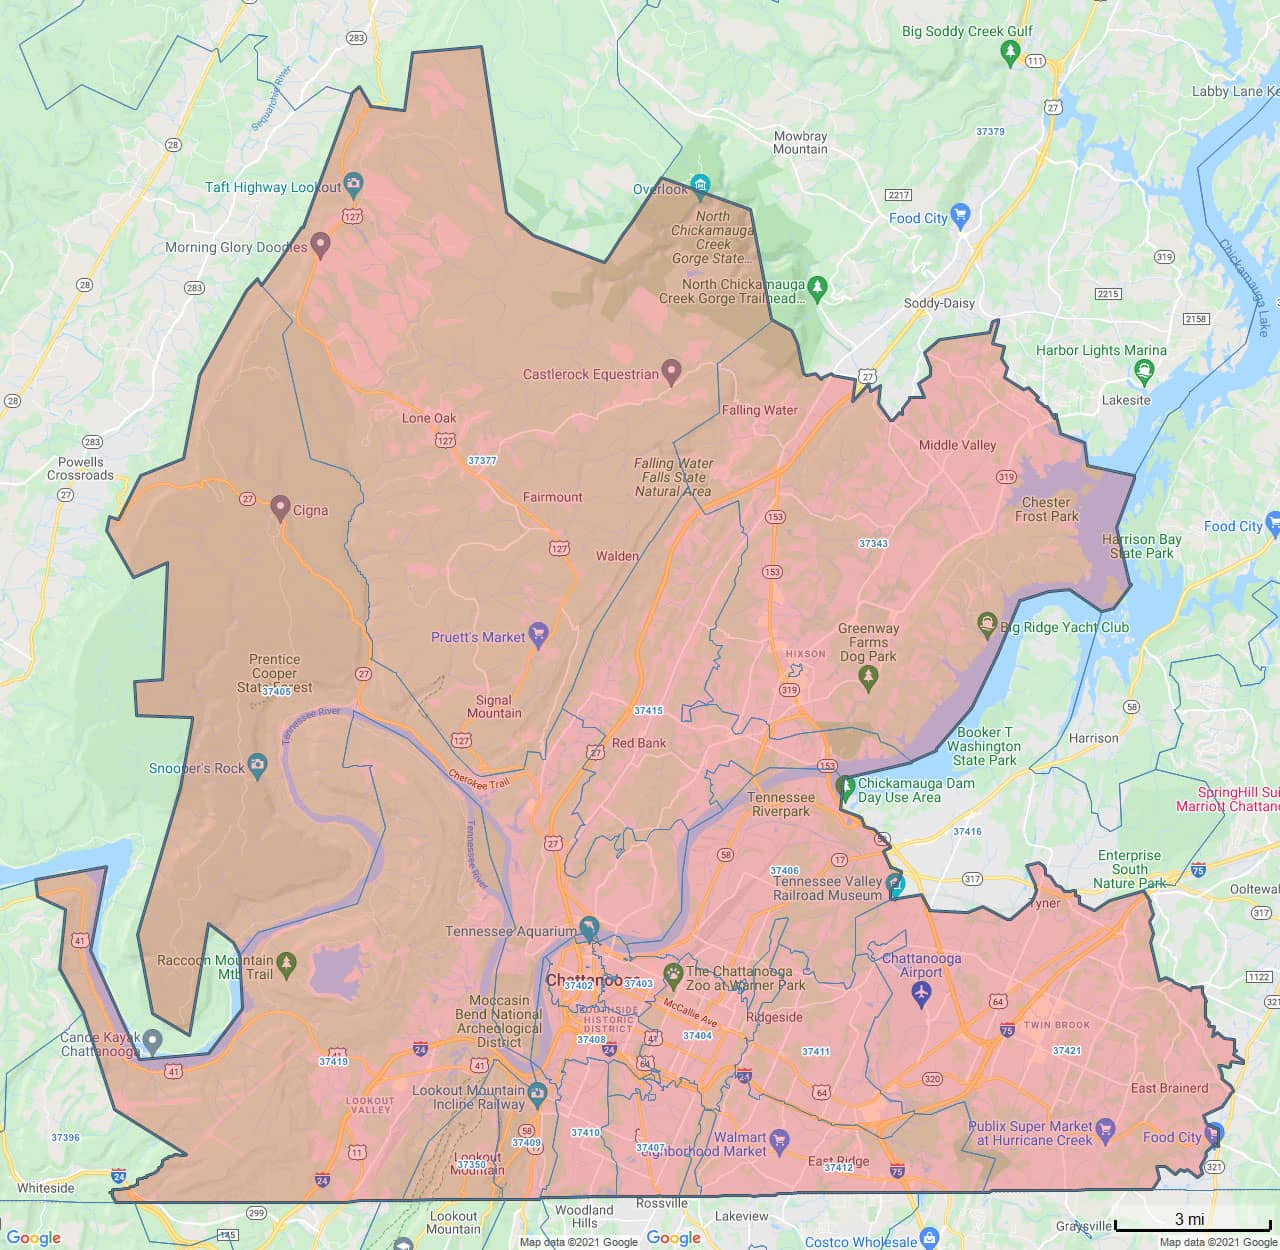 All Dry Services Area Coverage Map for Chattanooga, TN